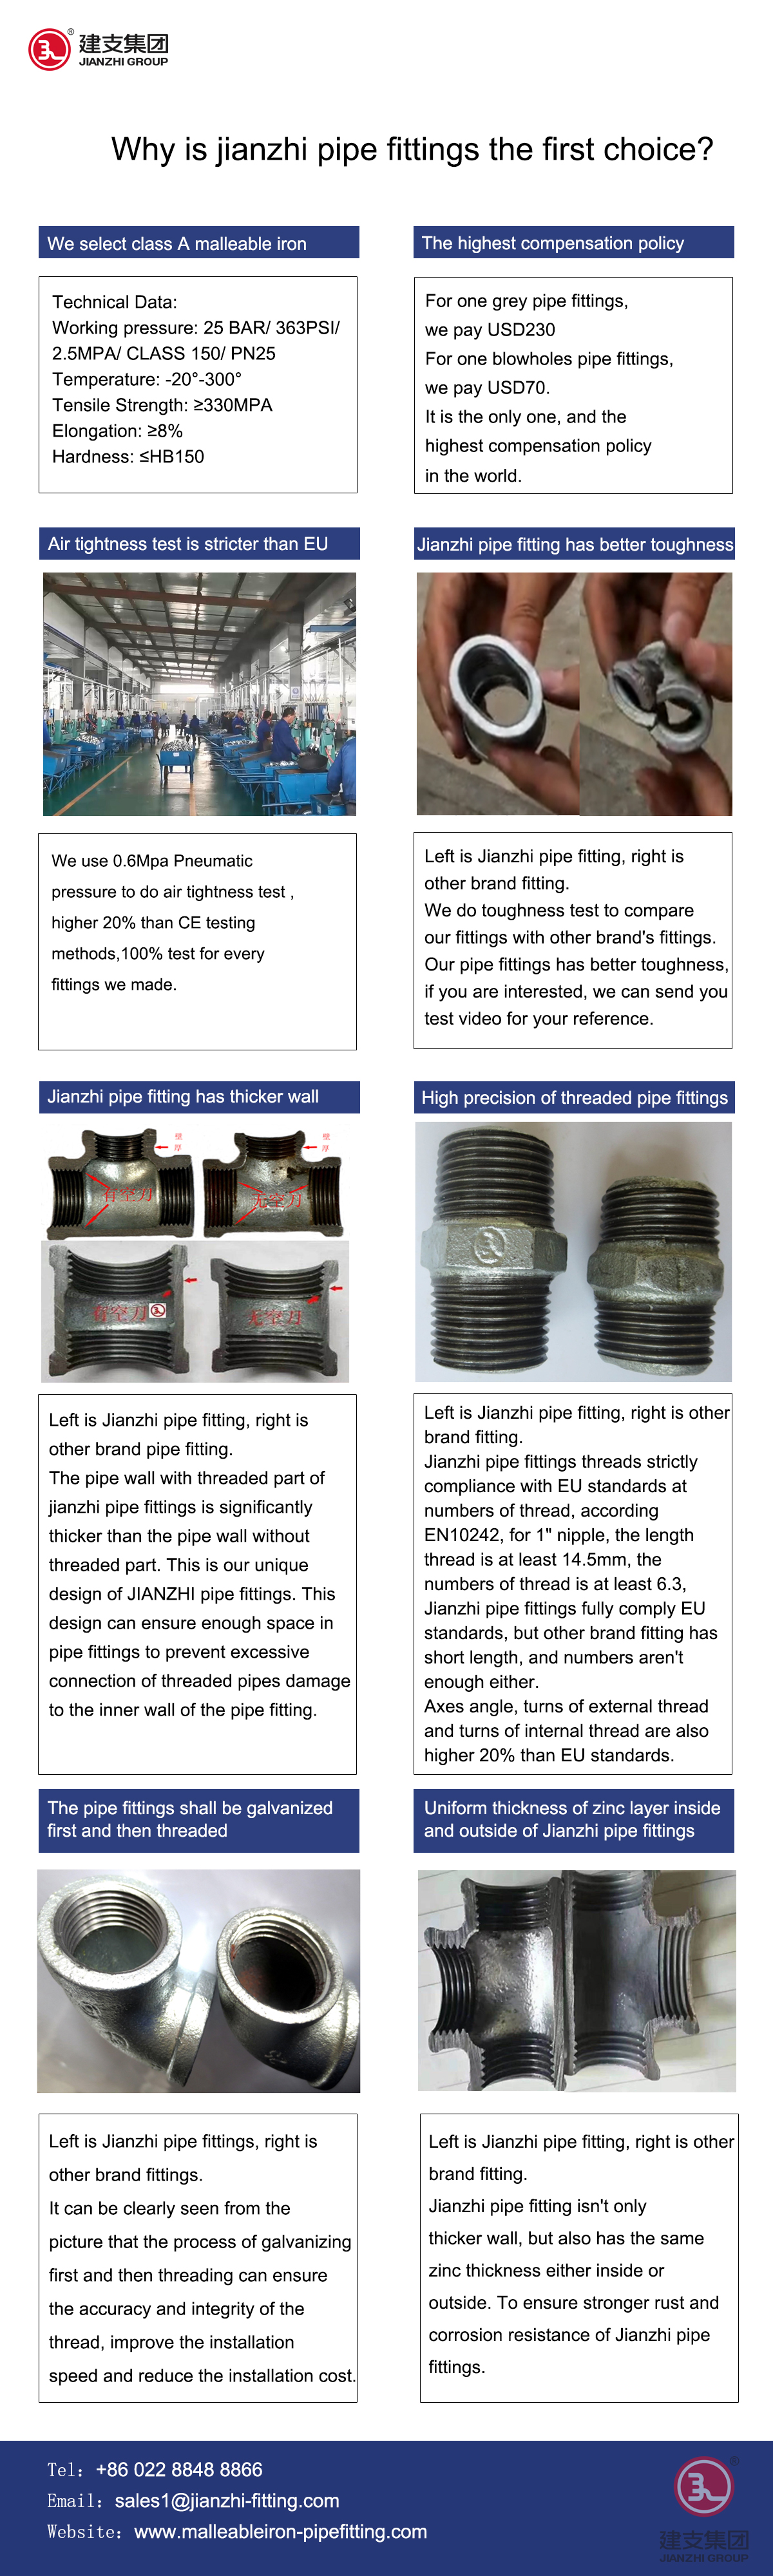 Why is jianzhi pipe fittings the first choice?cid=11